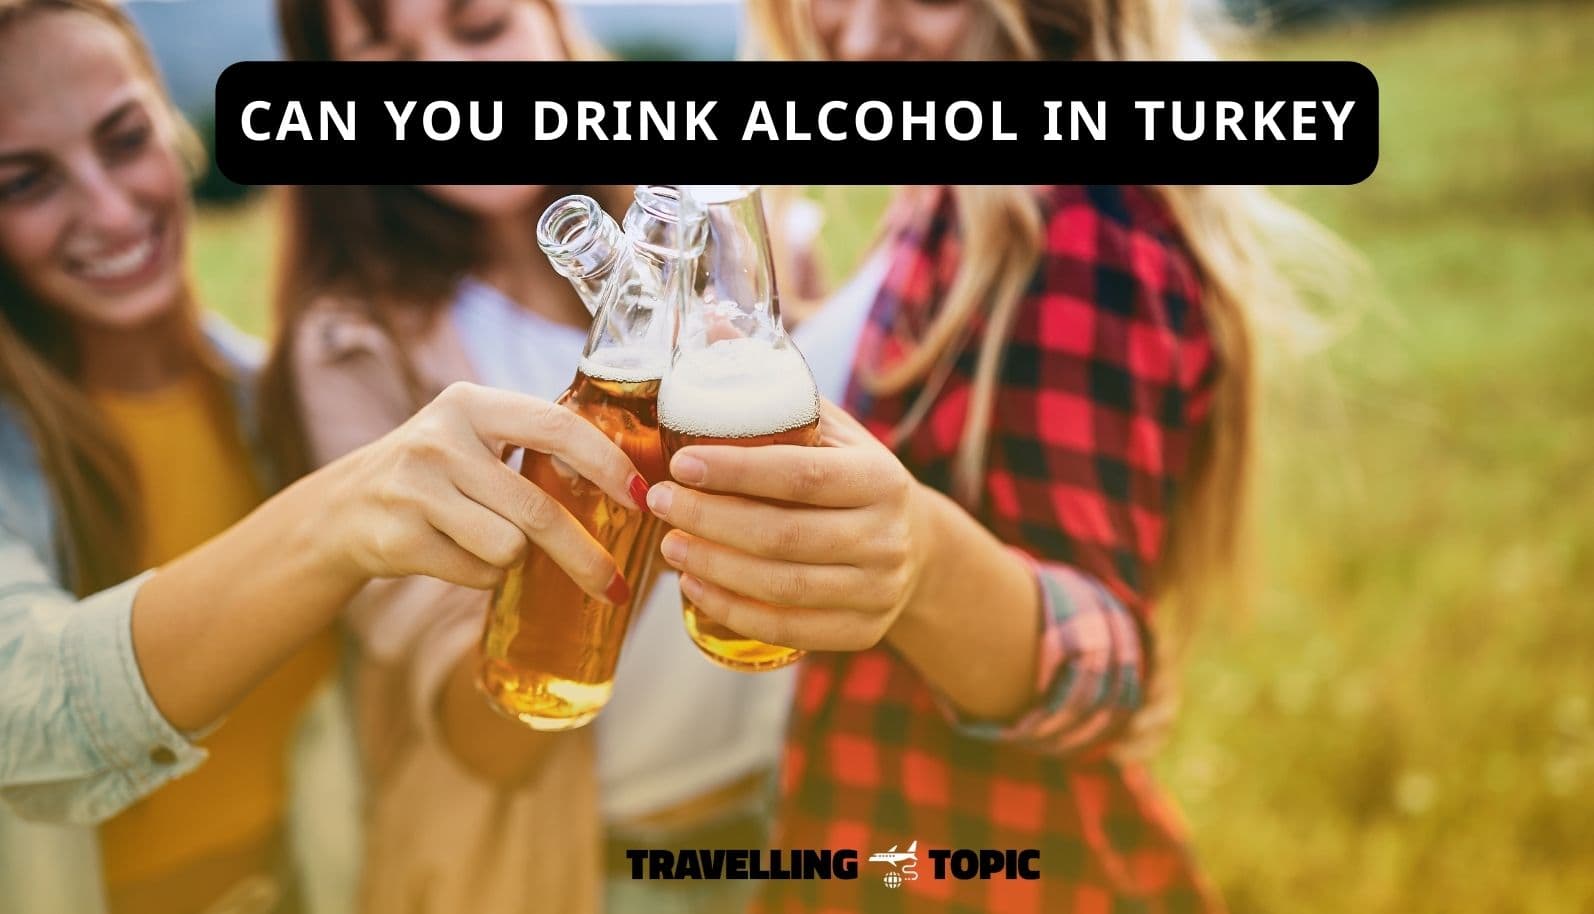 can you drink alcohol in turkey?